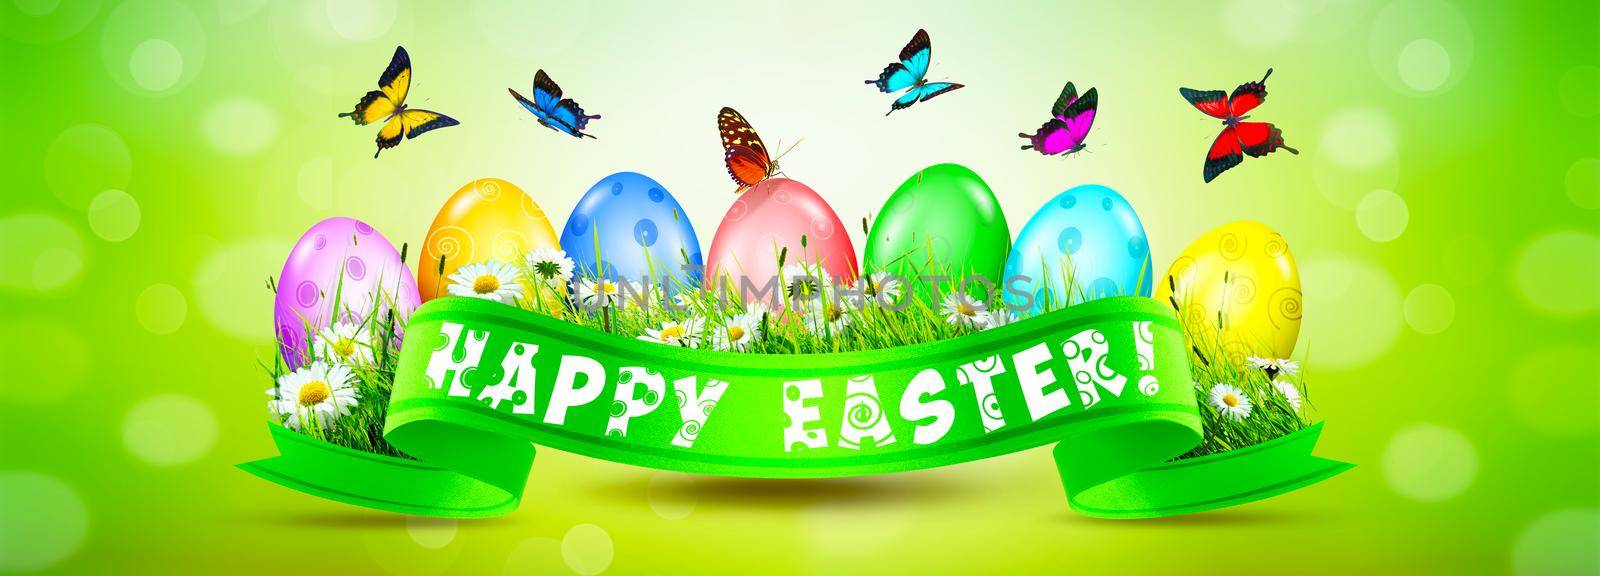 Beautiful Easter background with colorful Easter eggs. 3d illustration by Taut